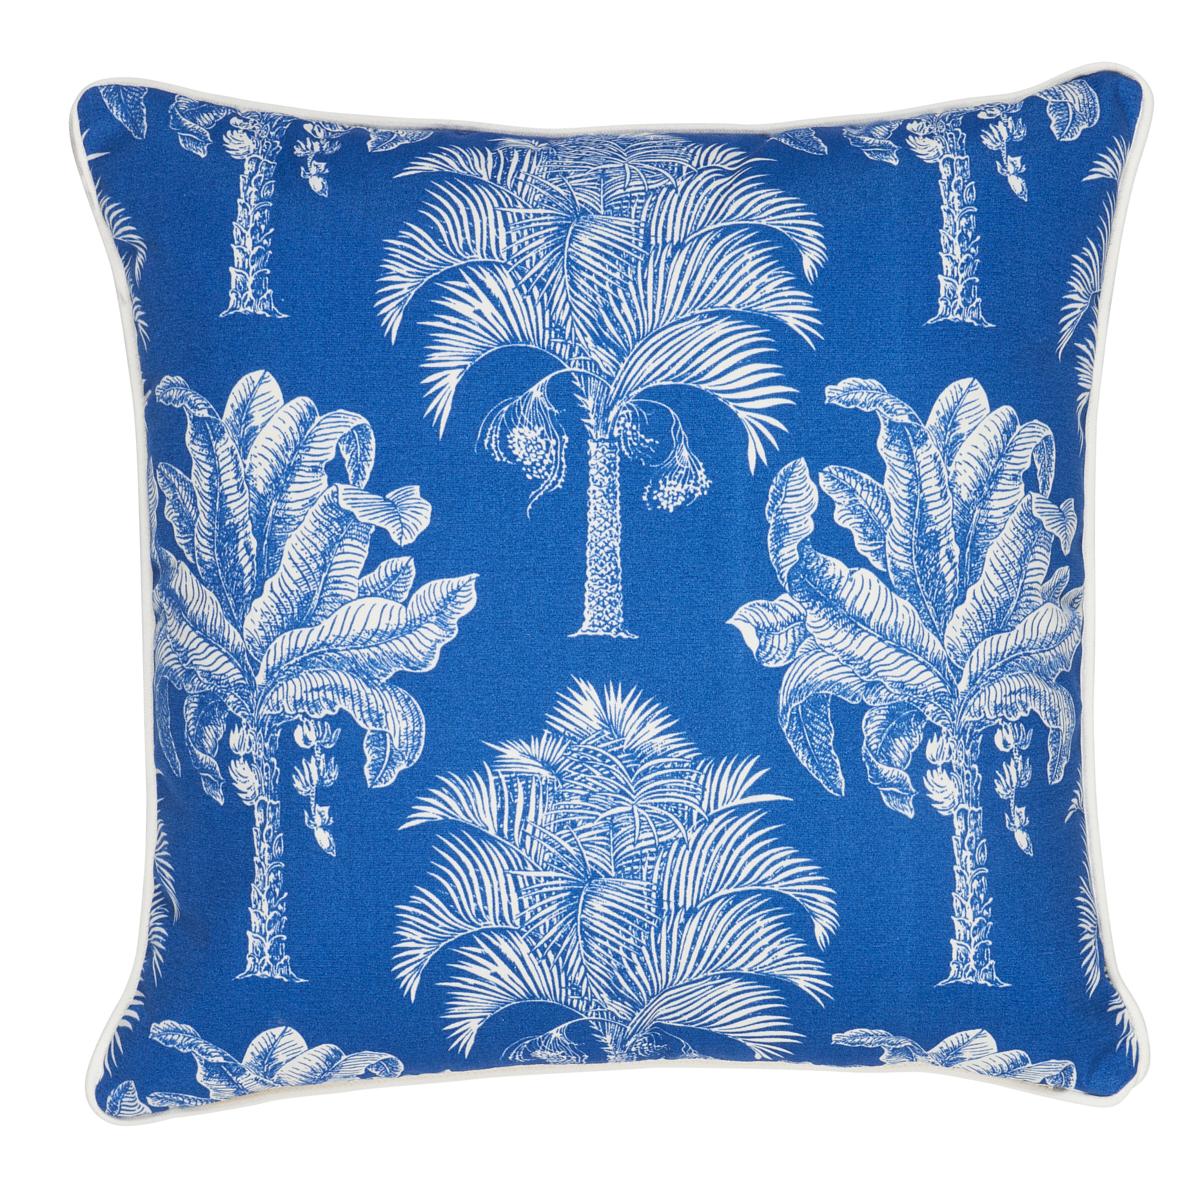 This pillow features Grand Palms Indoor/Outdoor. Featuring fabulous palm trees scaled to fit beautifully on pillows, Grand Palms Indoor/Outdoor in navy is a wonderfully versatile design with tropical flair. Pillow is finished with a welt in Eubie